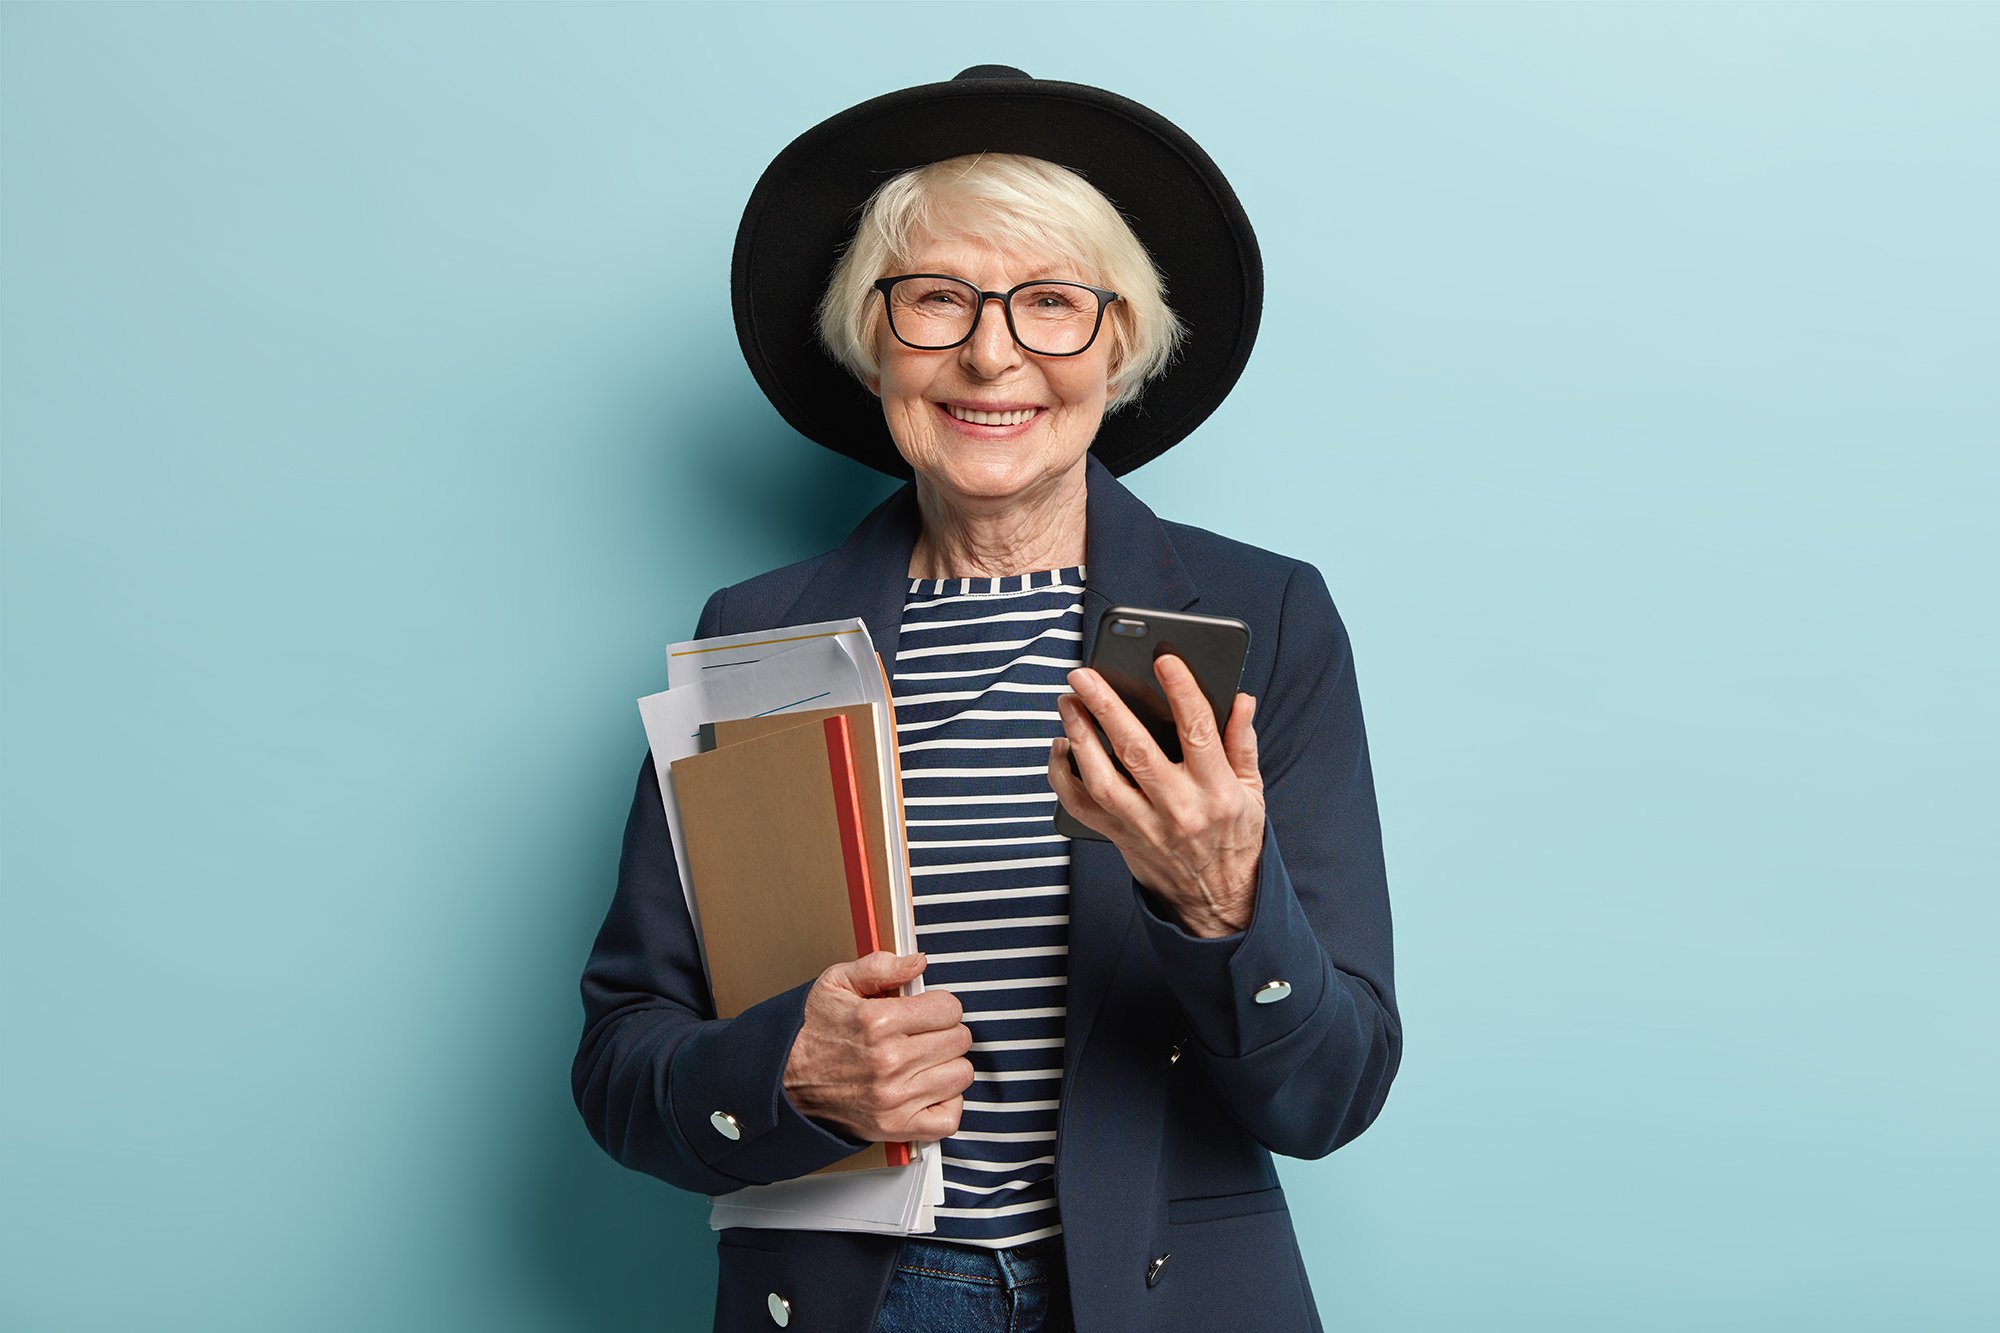 portrait-retired-teacher-with-grey-hair-wrinkled-skin-carries-papers-notebook